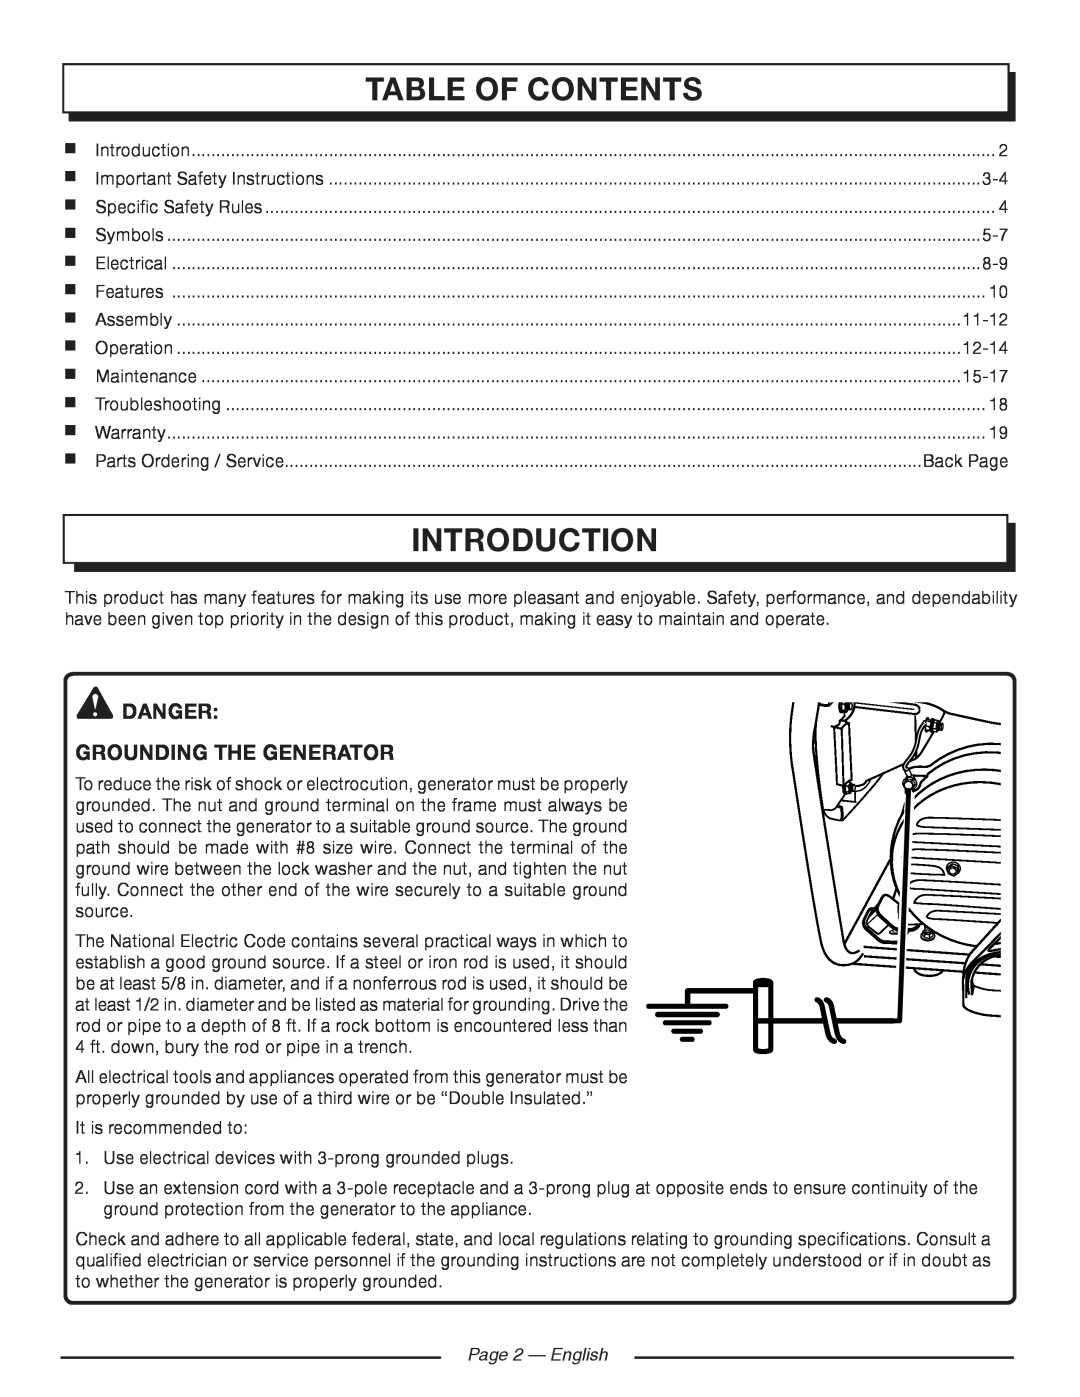 Homelite HGCA3000 manuel dutilisation Introduction, Table Of Contents, danger Grounding the Generator, Page 2 - English 